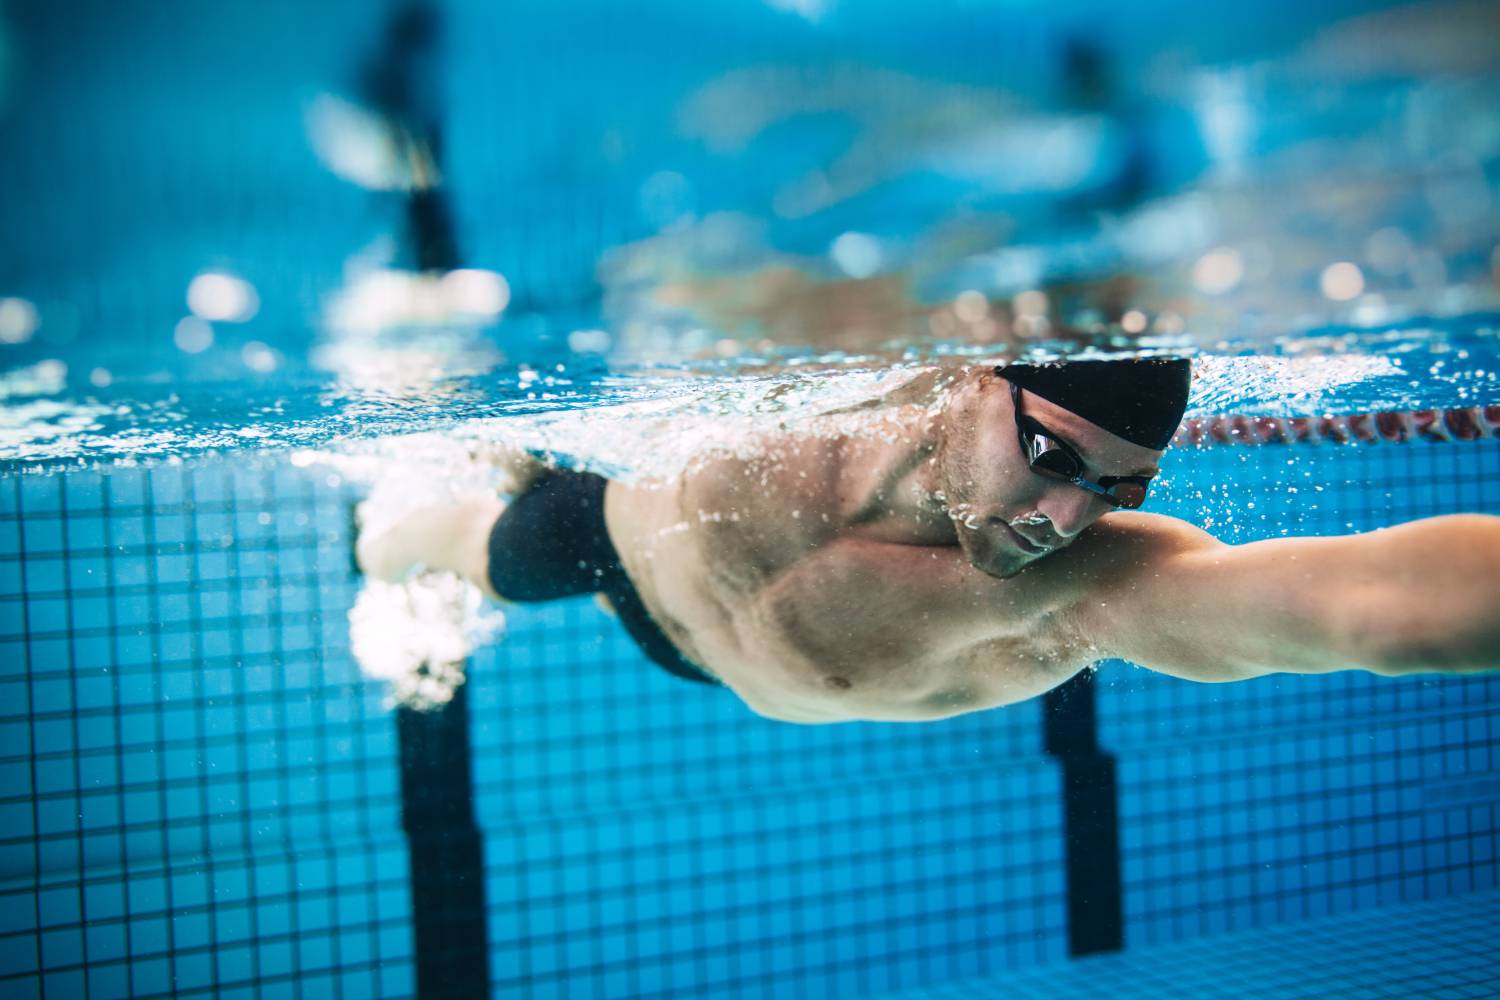 Underwater shot of professional male athlete swimming in pool. Man swimmer in action.